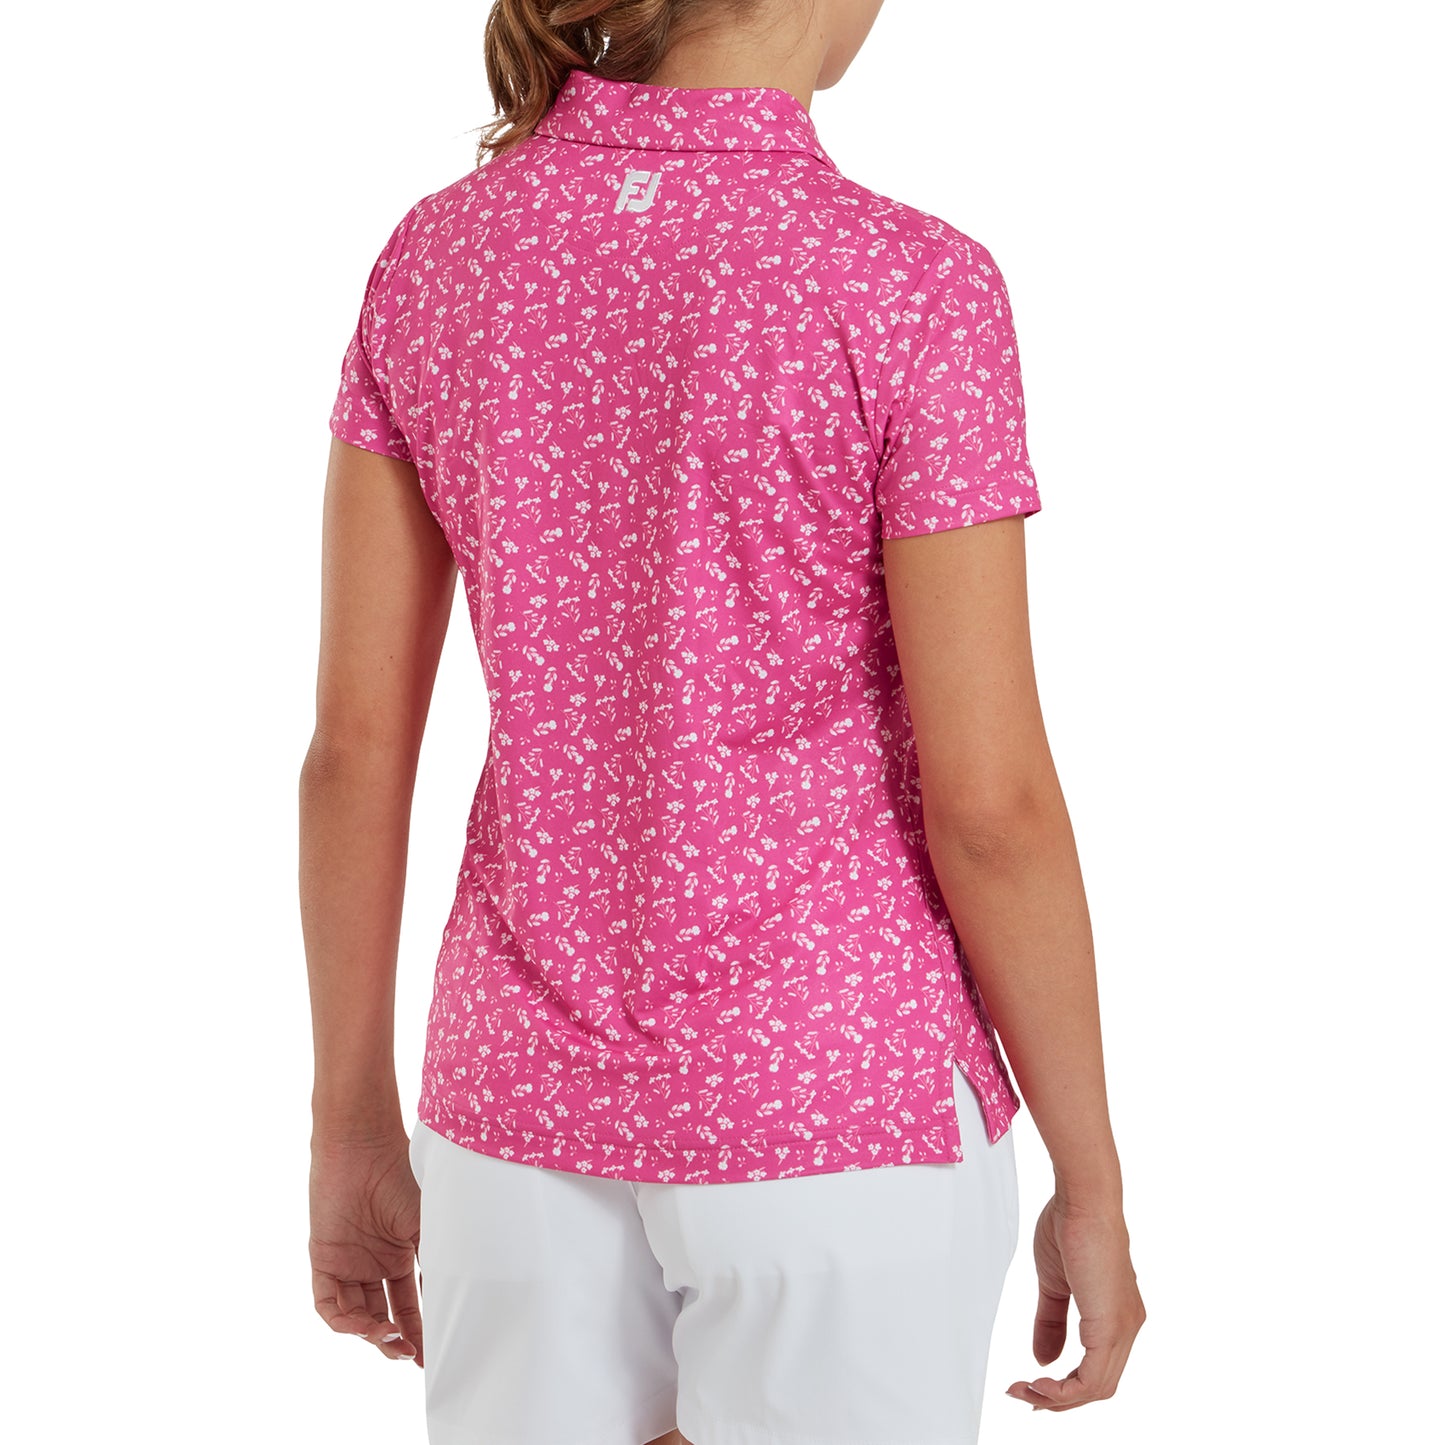 FootJoy Women's Floral Print Polo in Hot Pink & White